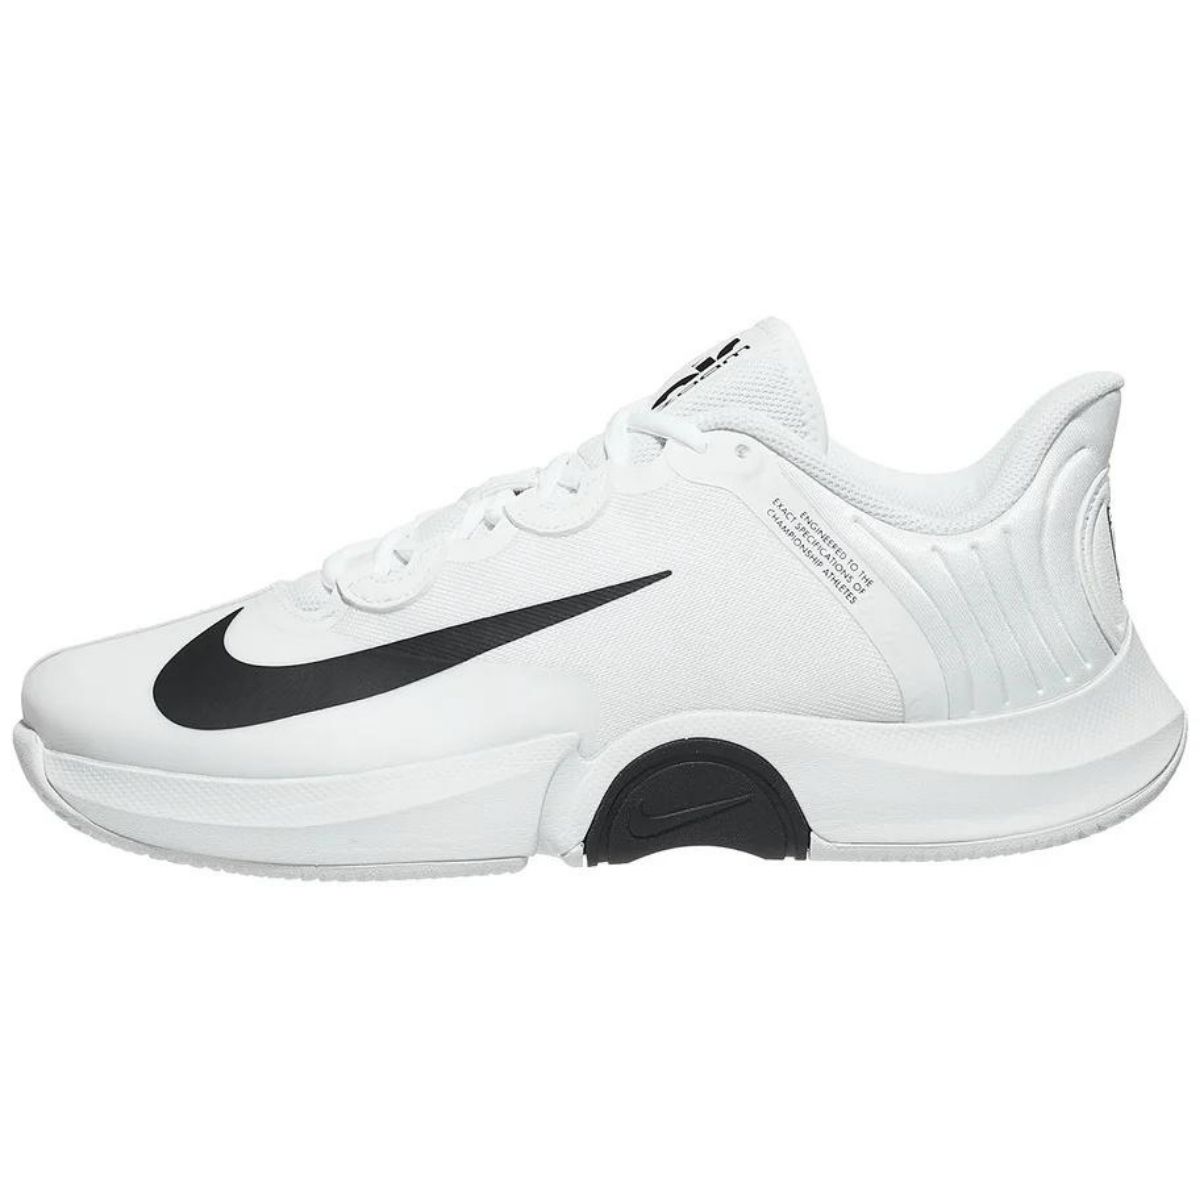 The Best Tennis Shoes Options: Nike Air Zoom GP Turbo